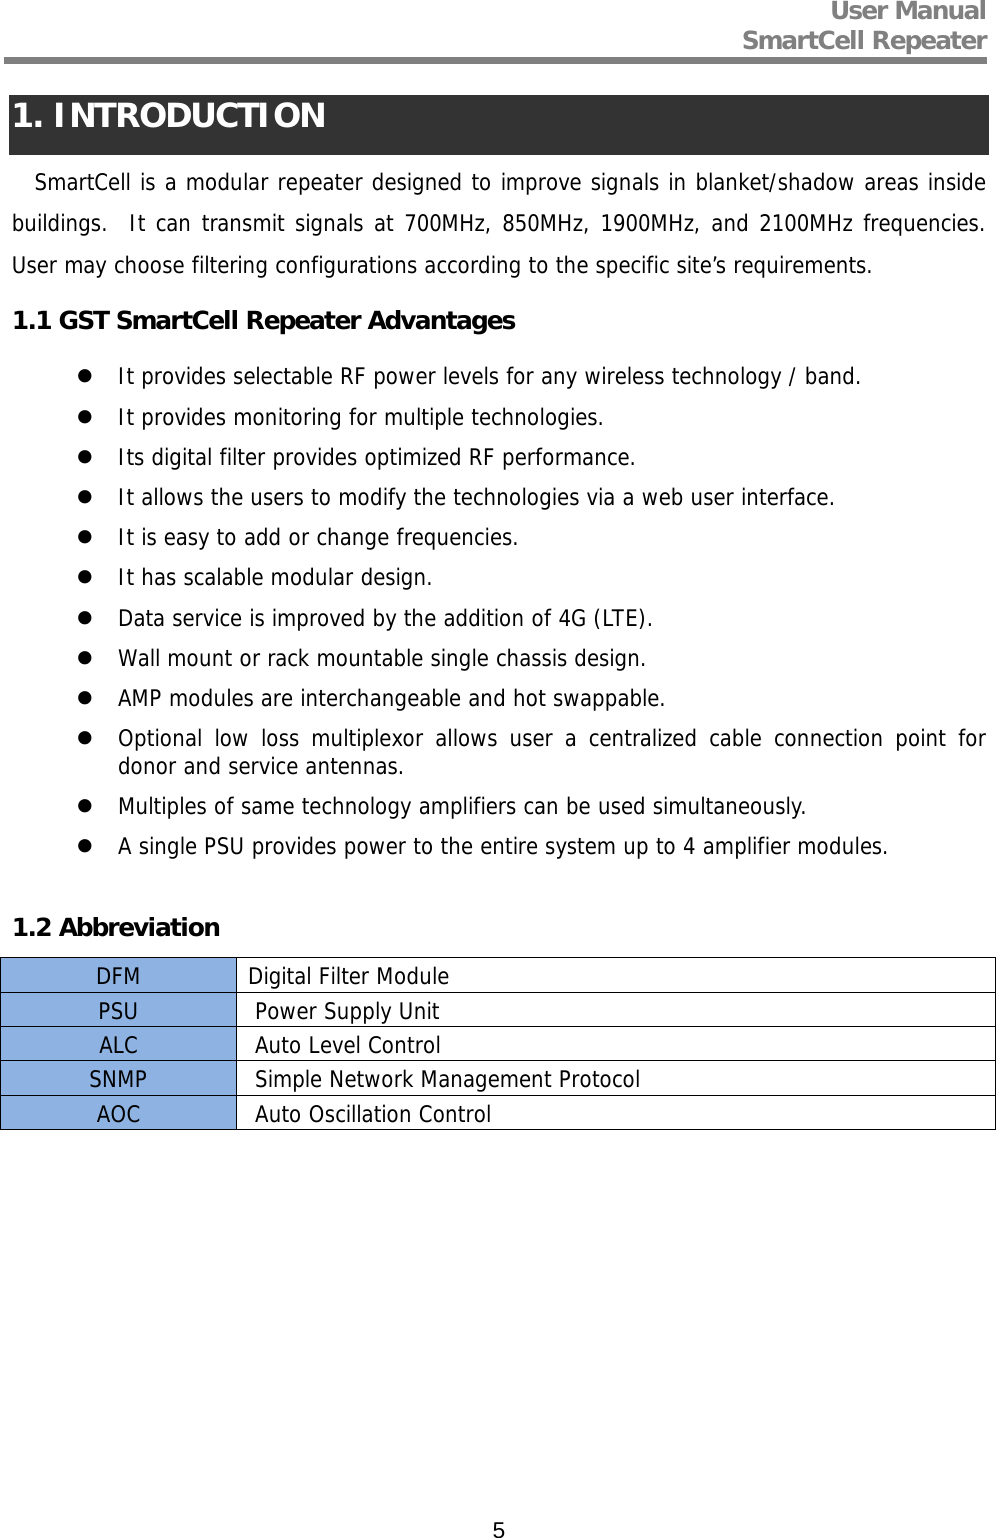 User Manual  SmartCell Repeater   51. INTRODUCTION SmartCell is a modular repeater designed to improve signals in blanket/shadow areas inside buildings.  It can transmit signals at 700MHz, 850MHz, 1900MHz, and 2100MHz frequencies. User may choose filtering configurations according to the specific site’s requirements.  1.1 GST SmartCell Repeater Advantages  It provides selectable RF power levels for any wireless technology / band.  It provides monitoring for multiple technologies.  Its digital filter provides optimized RF performance.  It allows the users to modify the technologies via a web user interface.  It is easy to add or change frequencies.  It has scalable modular design.  Data service is improved by the addition of 4G (LTE).  Wall mount or rack mountable single chassis design.  AMP modules are interchangeable and hot swappable.  Optional low loss multiplexor allows user a centralized cable connection point for donor and service antennas.  Multiples of same technology amplifiers can be used simultaneously.  A single PSU provides power to the entire system up to 4 amplifier modules.  1.2 Abbreviation DFM  Digital Filter Module PSU   Power Supply Unit ALC   Auto Level Control SNMP   Simple Network Management Protocol AOC   Auto Oscillation Control            